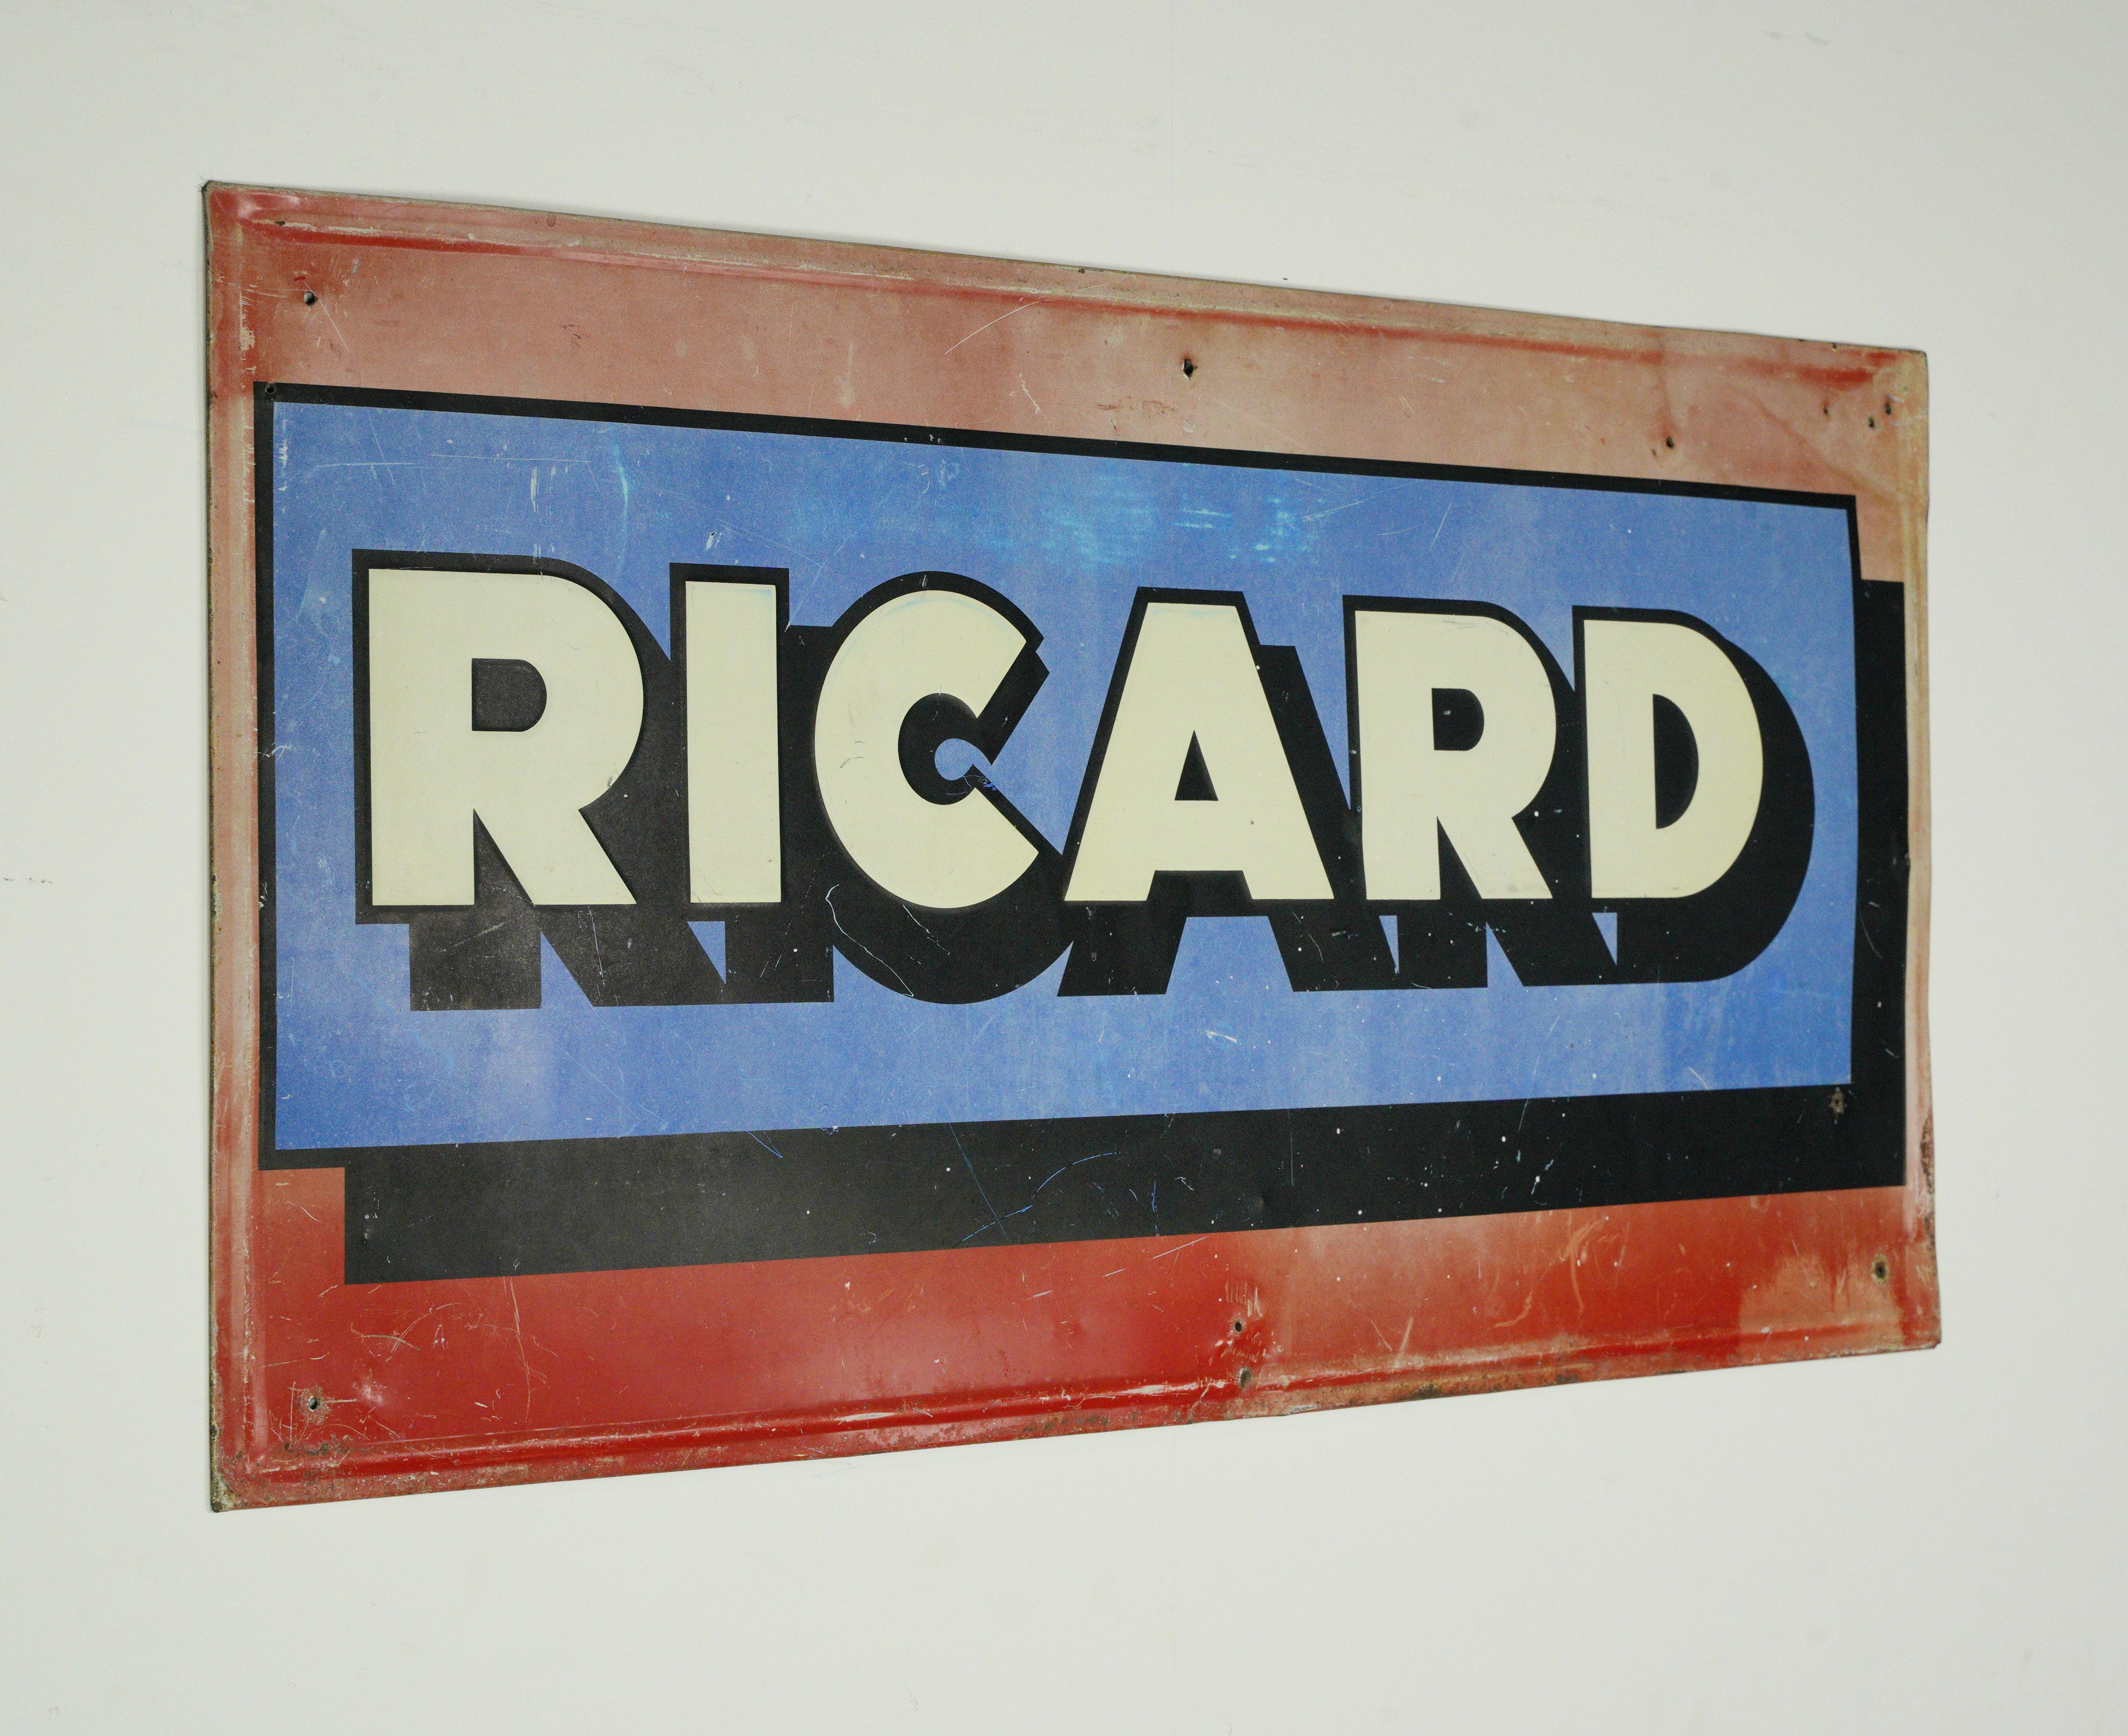 European Enameled Steel Ricard Wall Sign In Good Condition For Sale In New York, NY